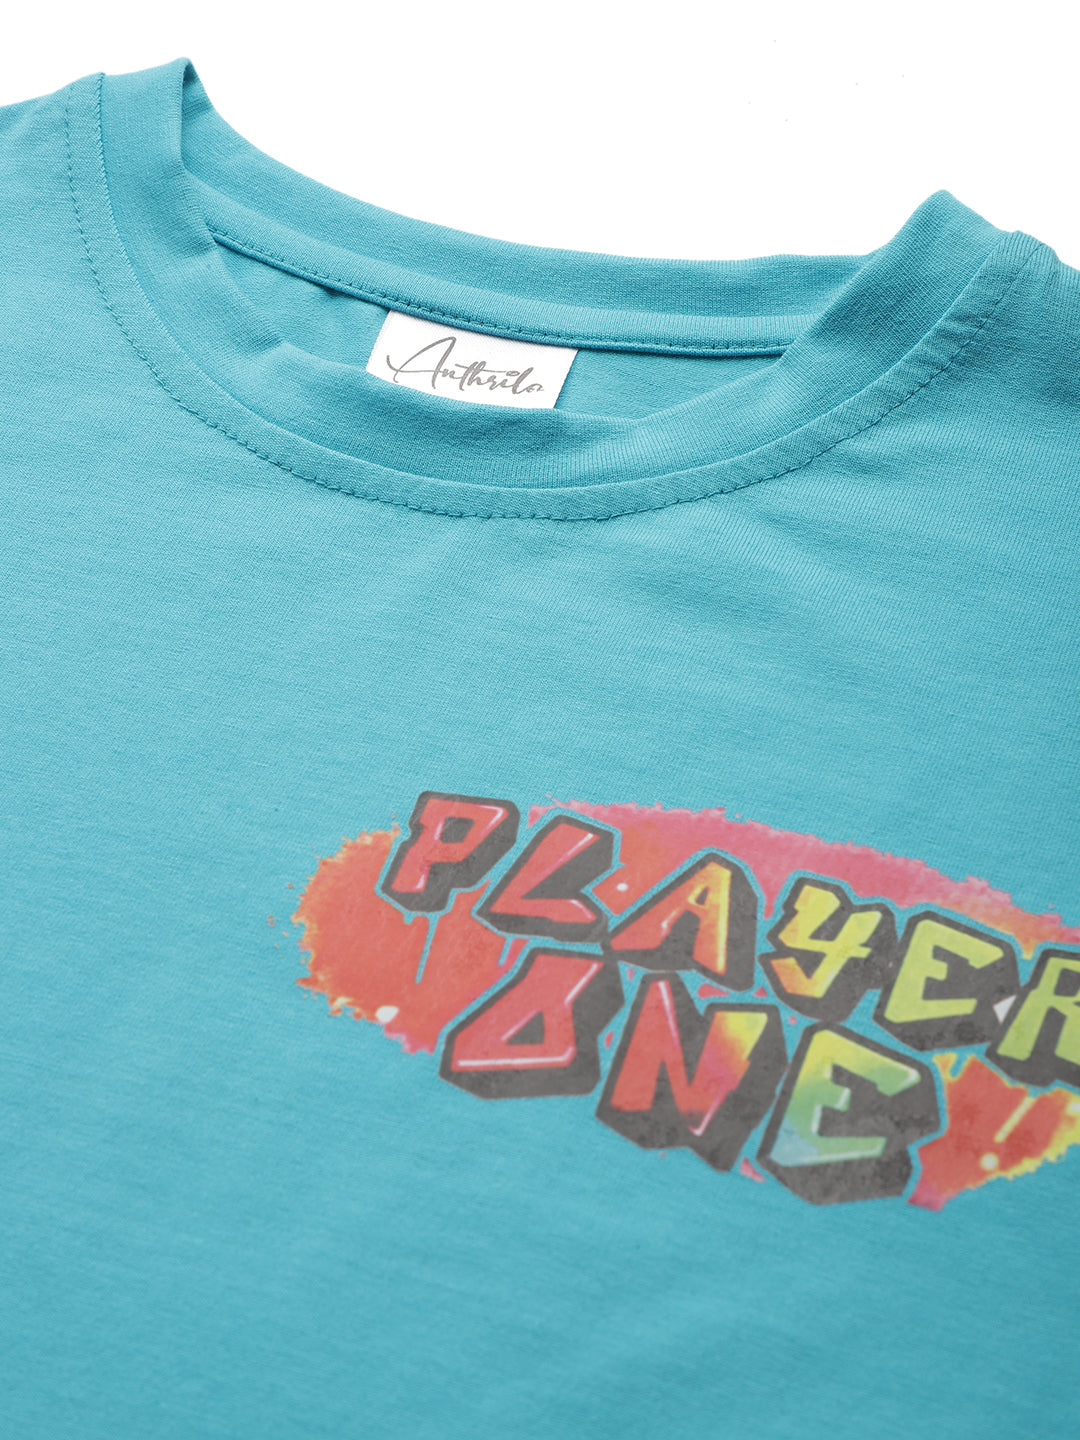 PLAYER ONE TERQUISE SUMMER GIRLS T-SHIRT -TERQUISE